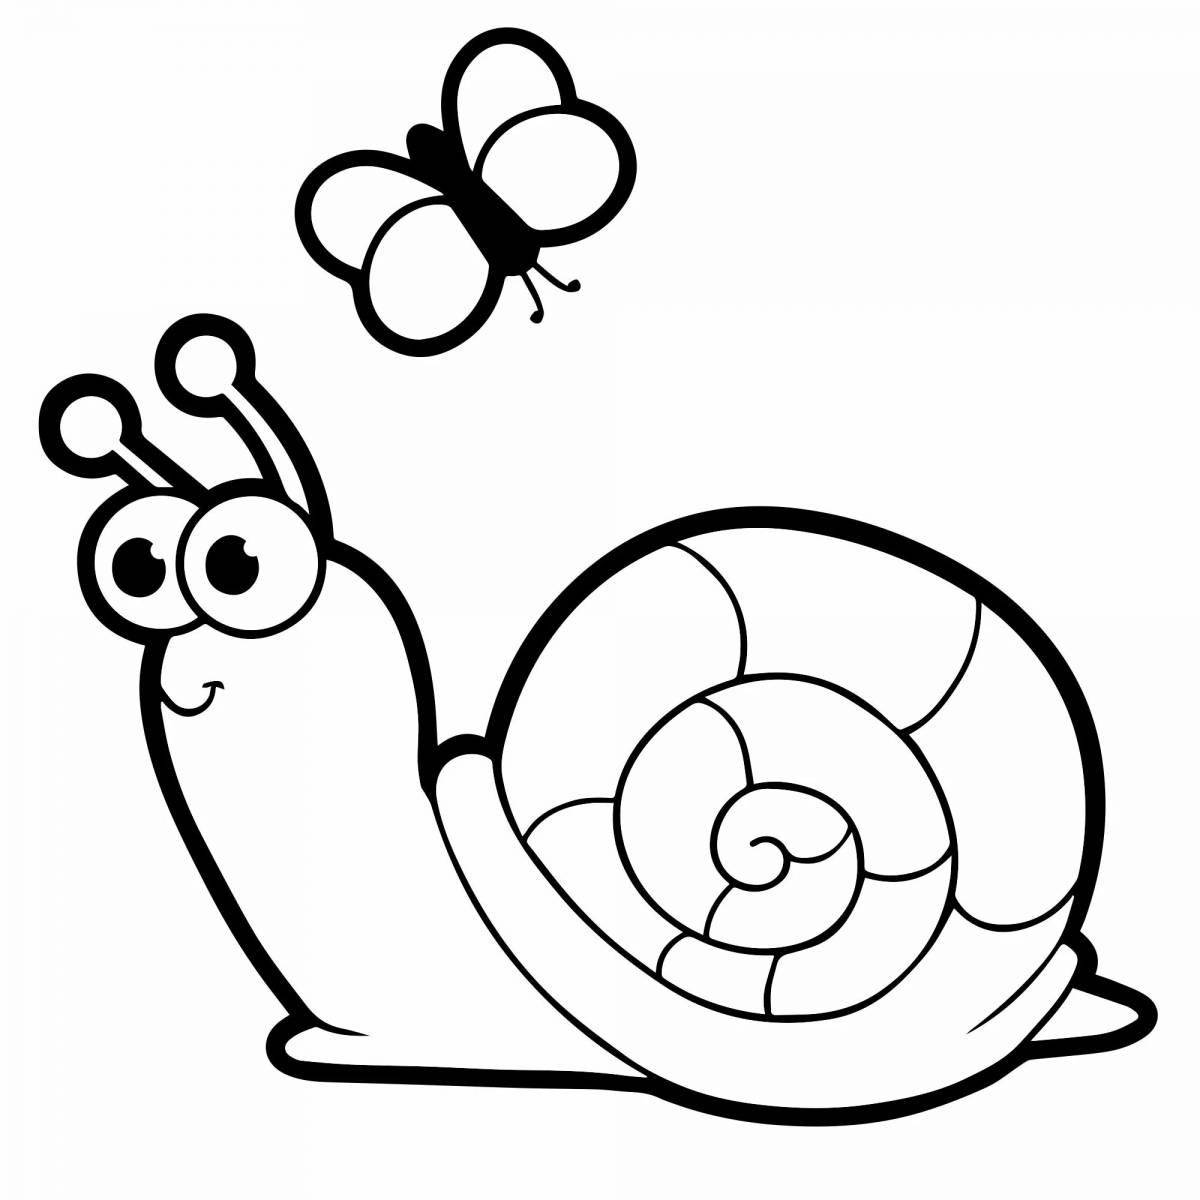 Adorable snail coloring book for 4-5 year olds